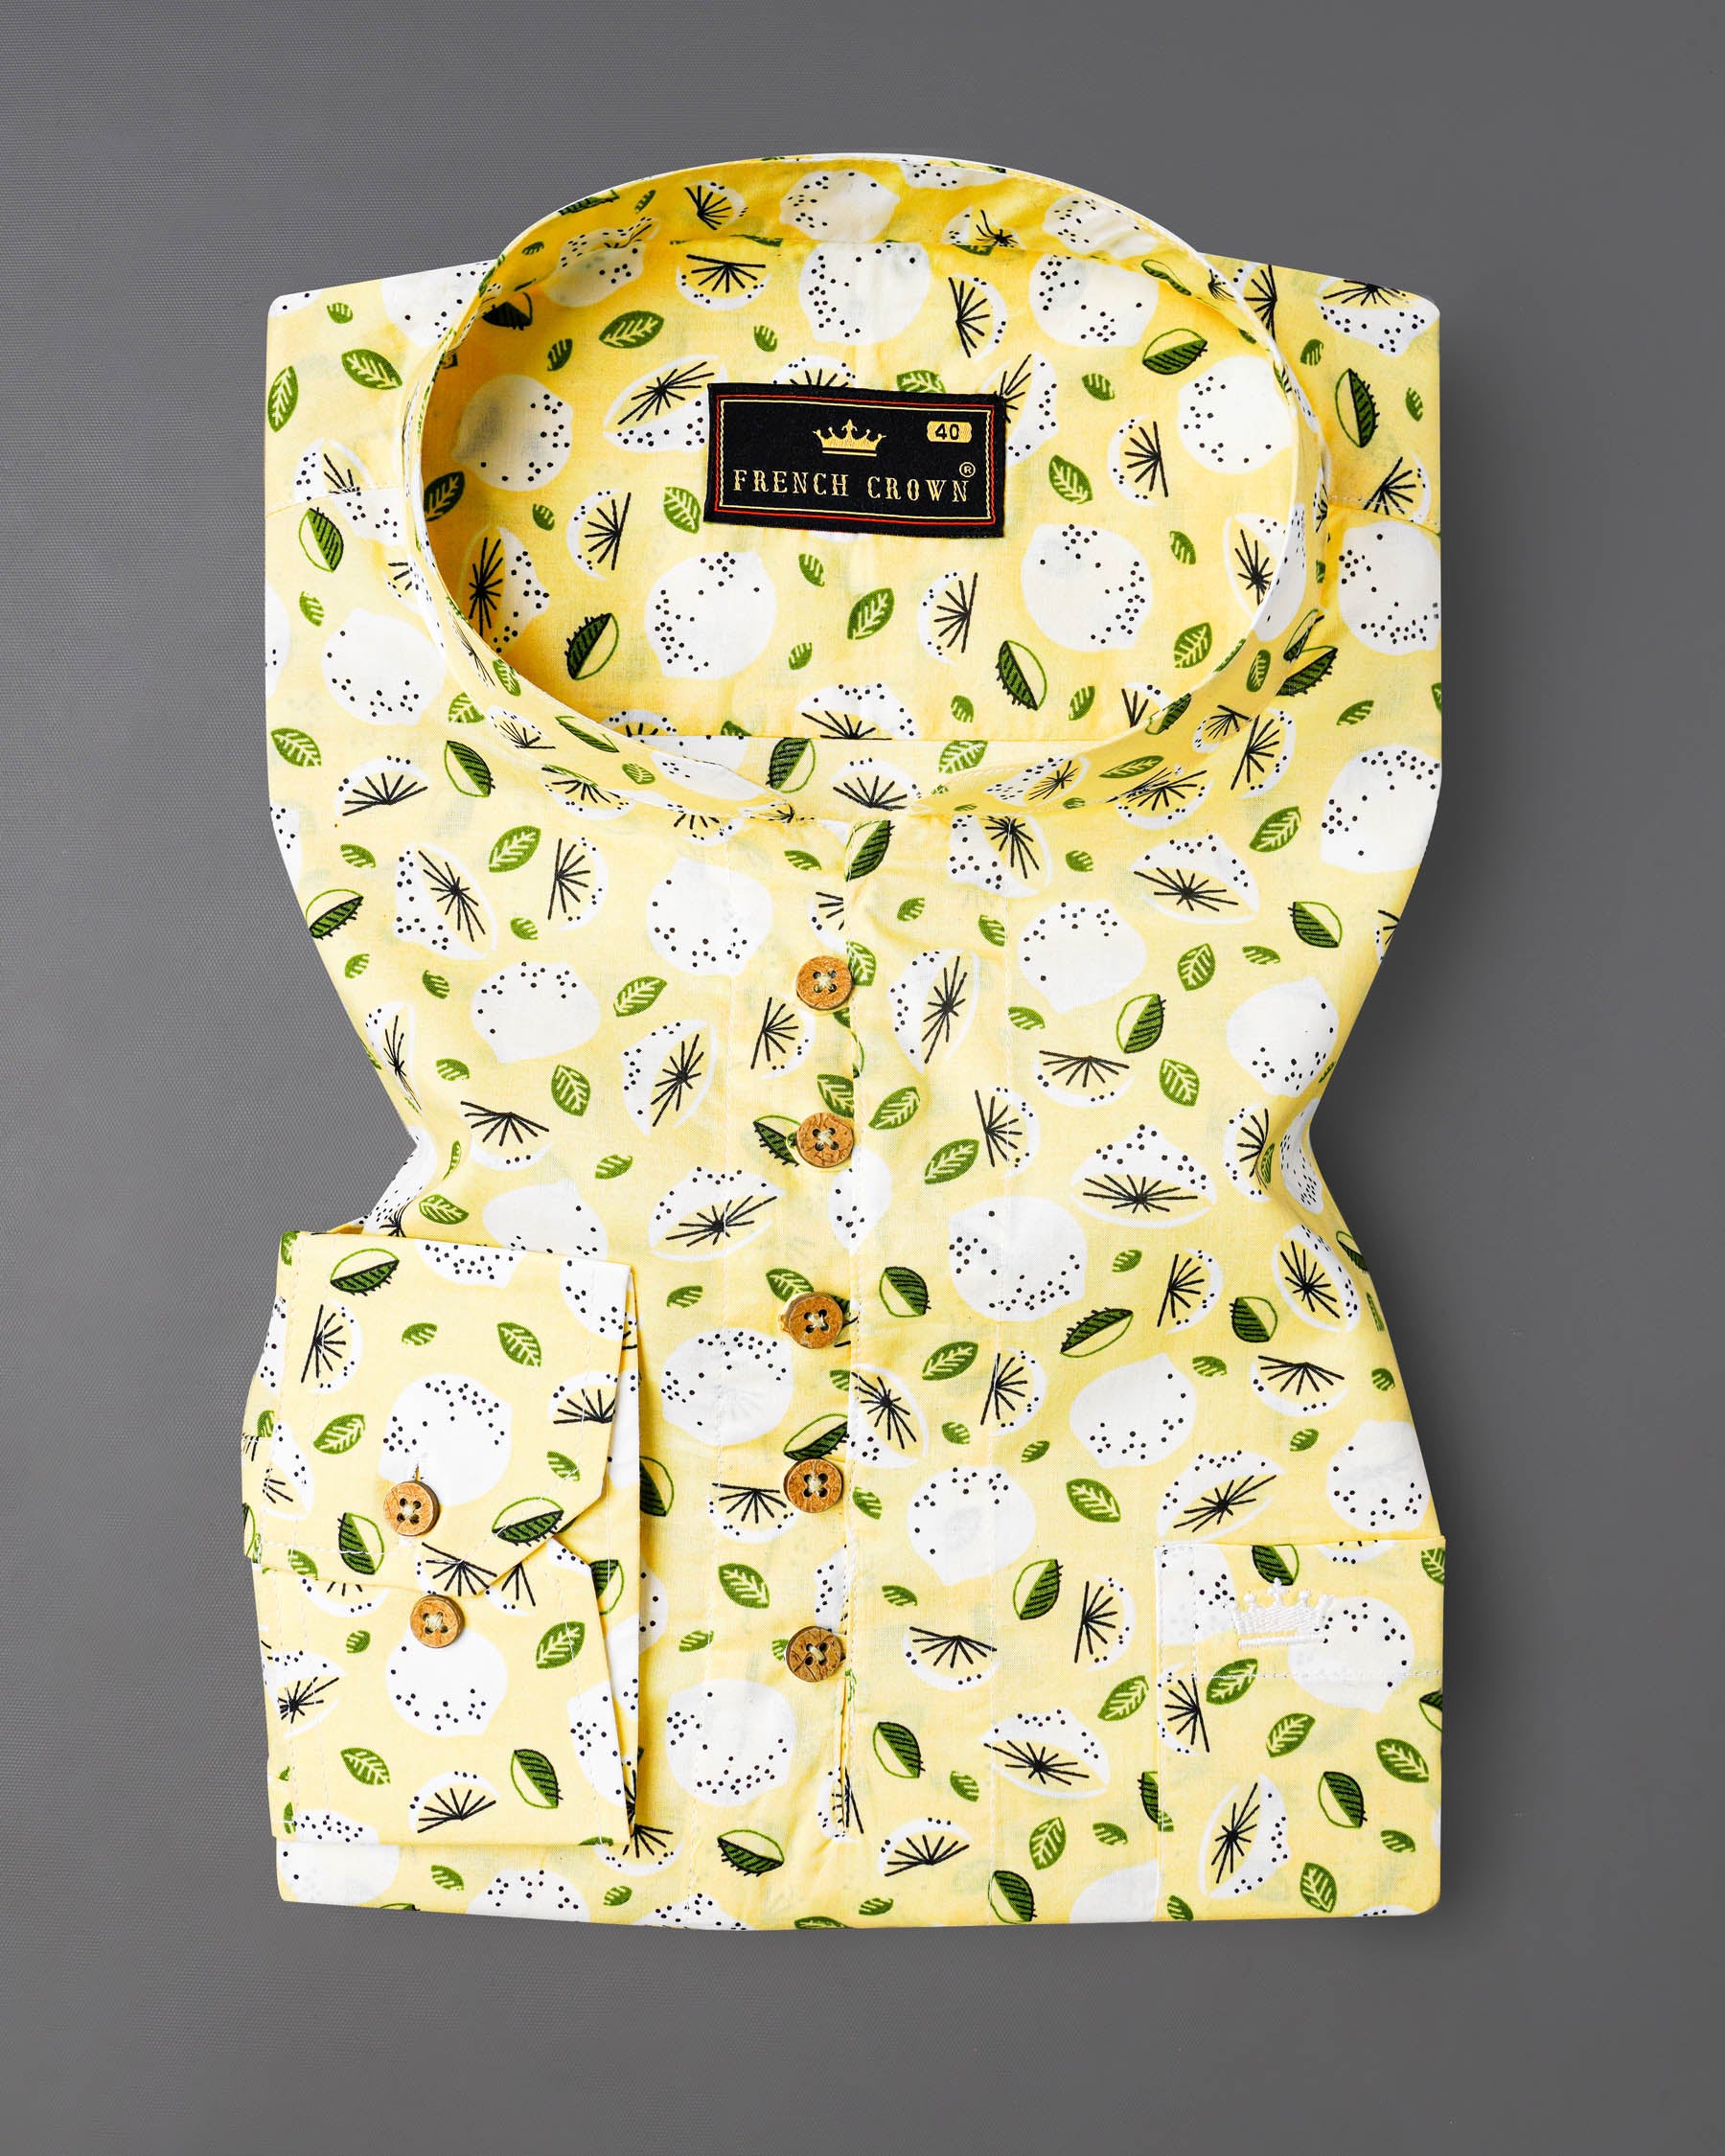 Pale Goldenrod Yellow Floral Printed Premium Cotton Kurta Shirt 7979-KS-38, 7979-KS-H-38, 7979-KS-39, 7979-KS-H-39, 7979-KS-40, 7979-KS-H-40, 7979-KS-42, 7979-KS-H-42, 7979-KS-44, 7979-KS-H-44, 7979-KS-46, 7979-KS-H-46, 7979-KS-48, 7979-KS-H-48, 7979-KS-50, 7979-KS-H-50, 7979-KS-52, 7979-KS-H-52